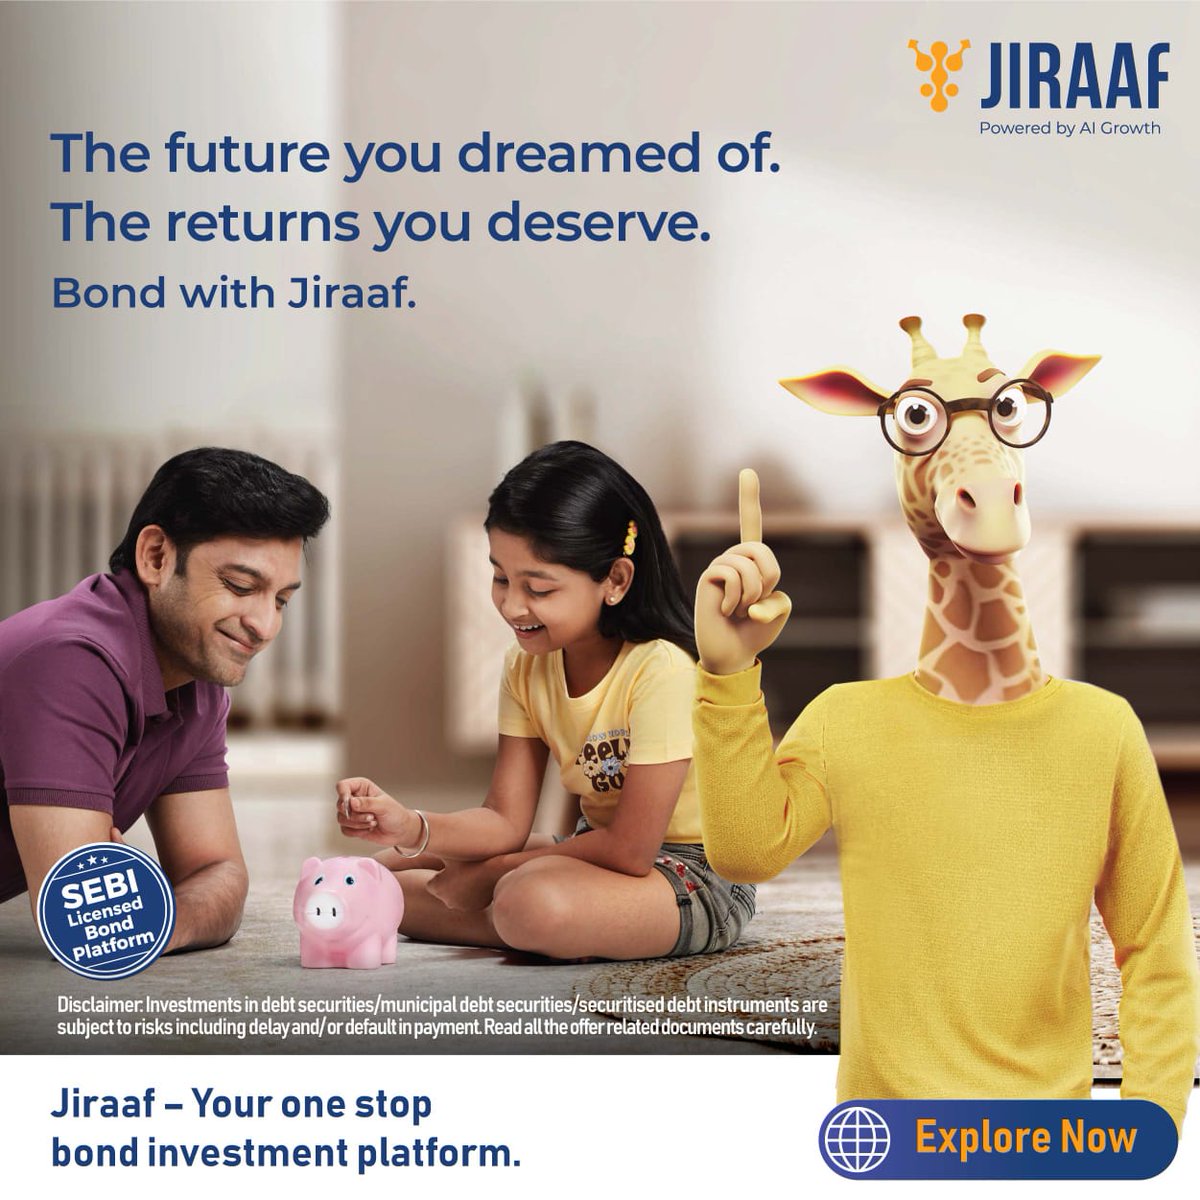 You all should must start your investment here and guys you all will get amezing benefits from here.
#BondWithJiraaf